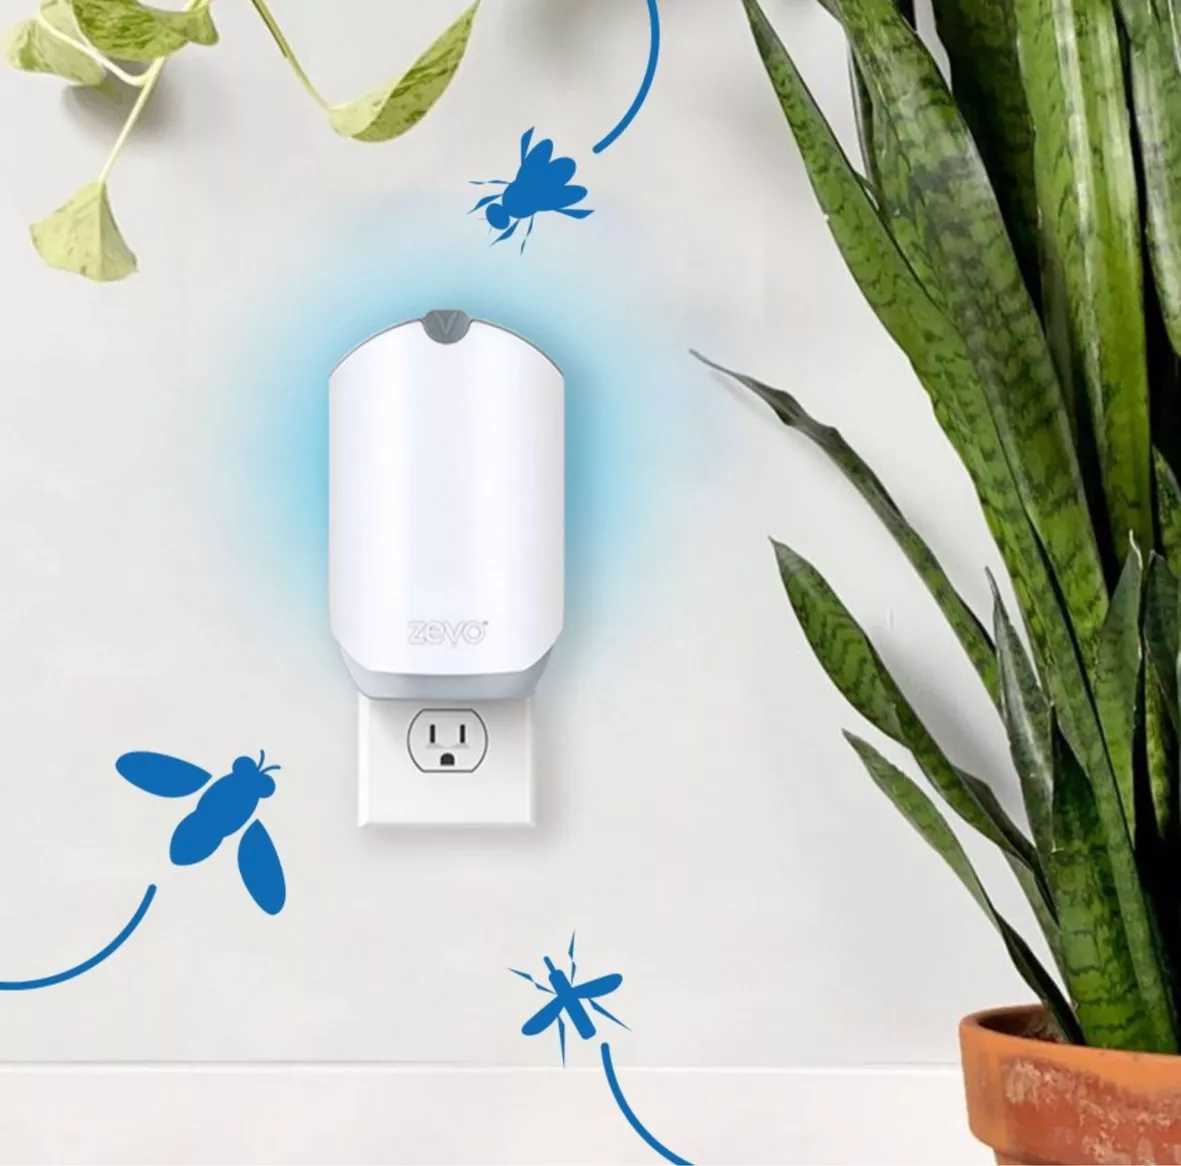 Zevo Flying Insect Trap (1 Plug-In Base + 1 Cartridge) Indoor